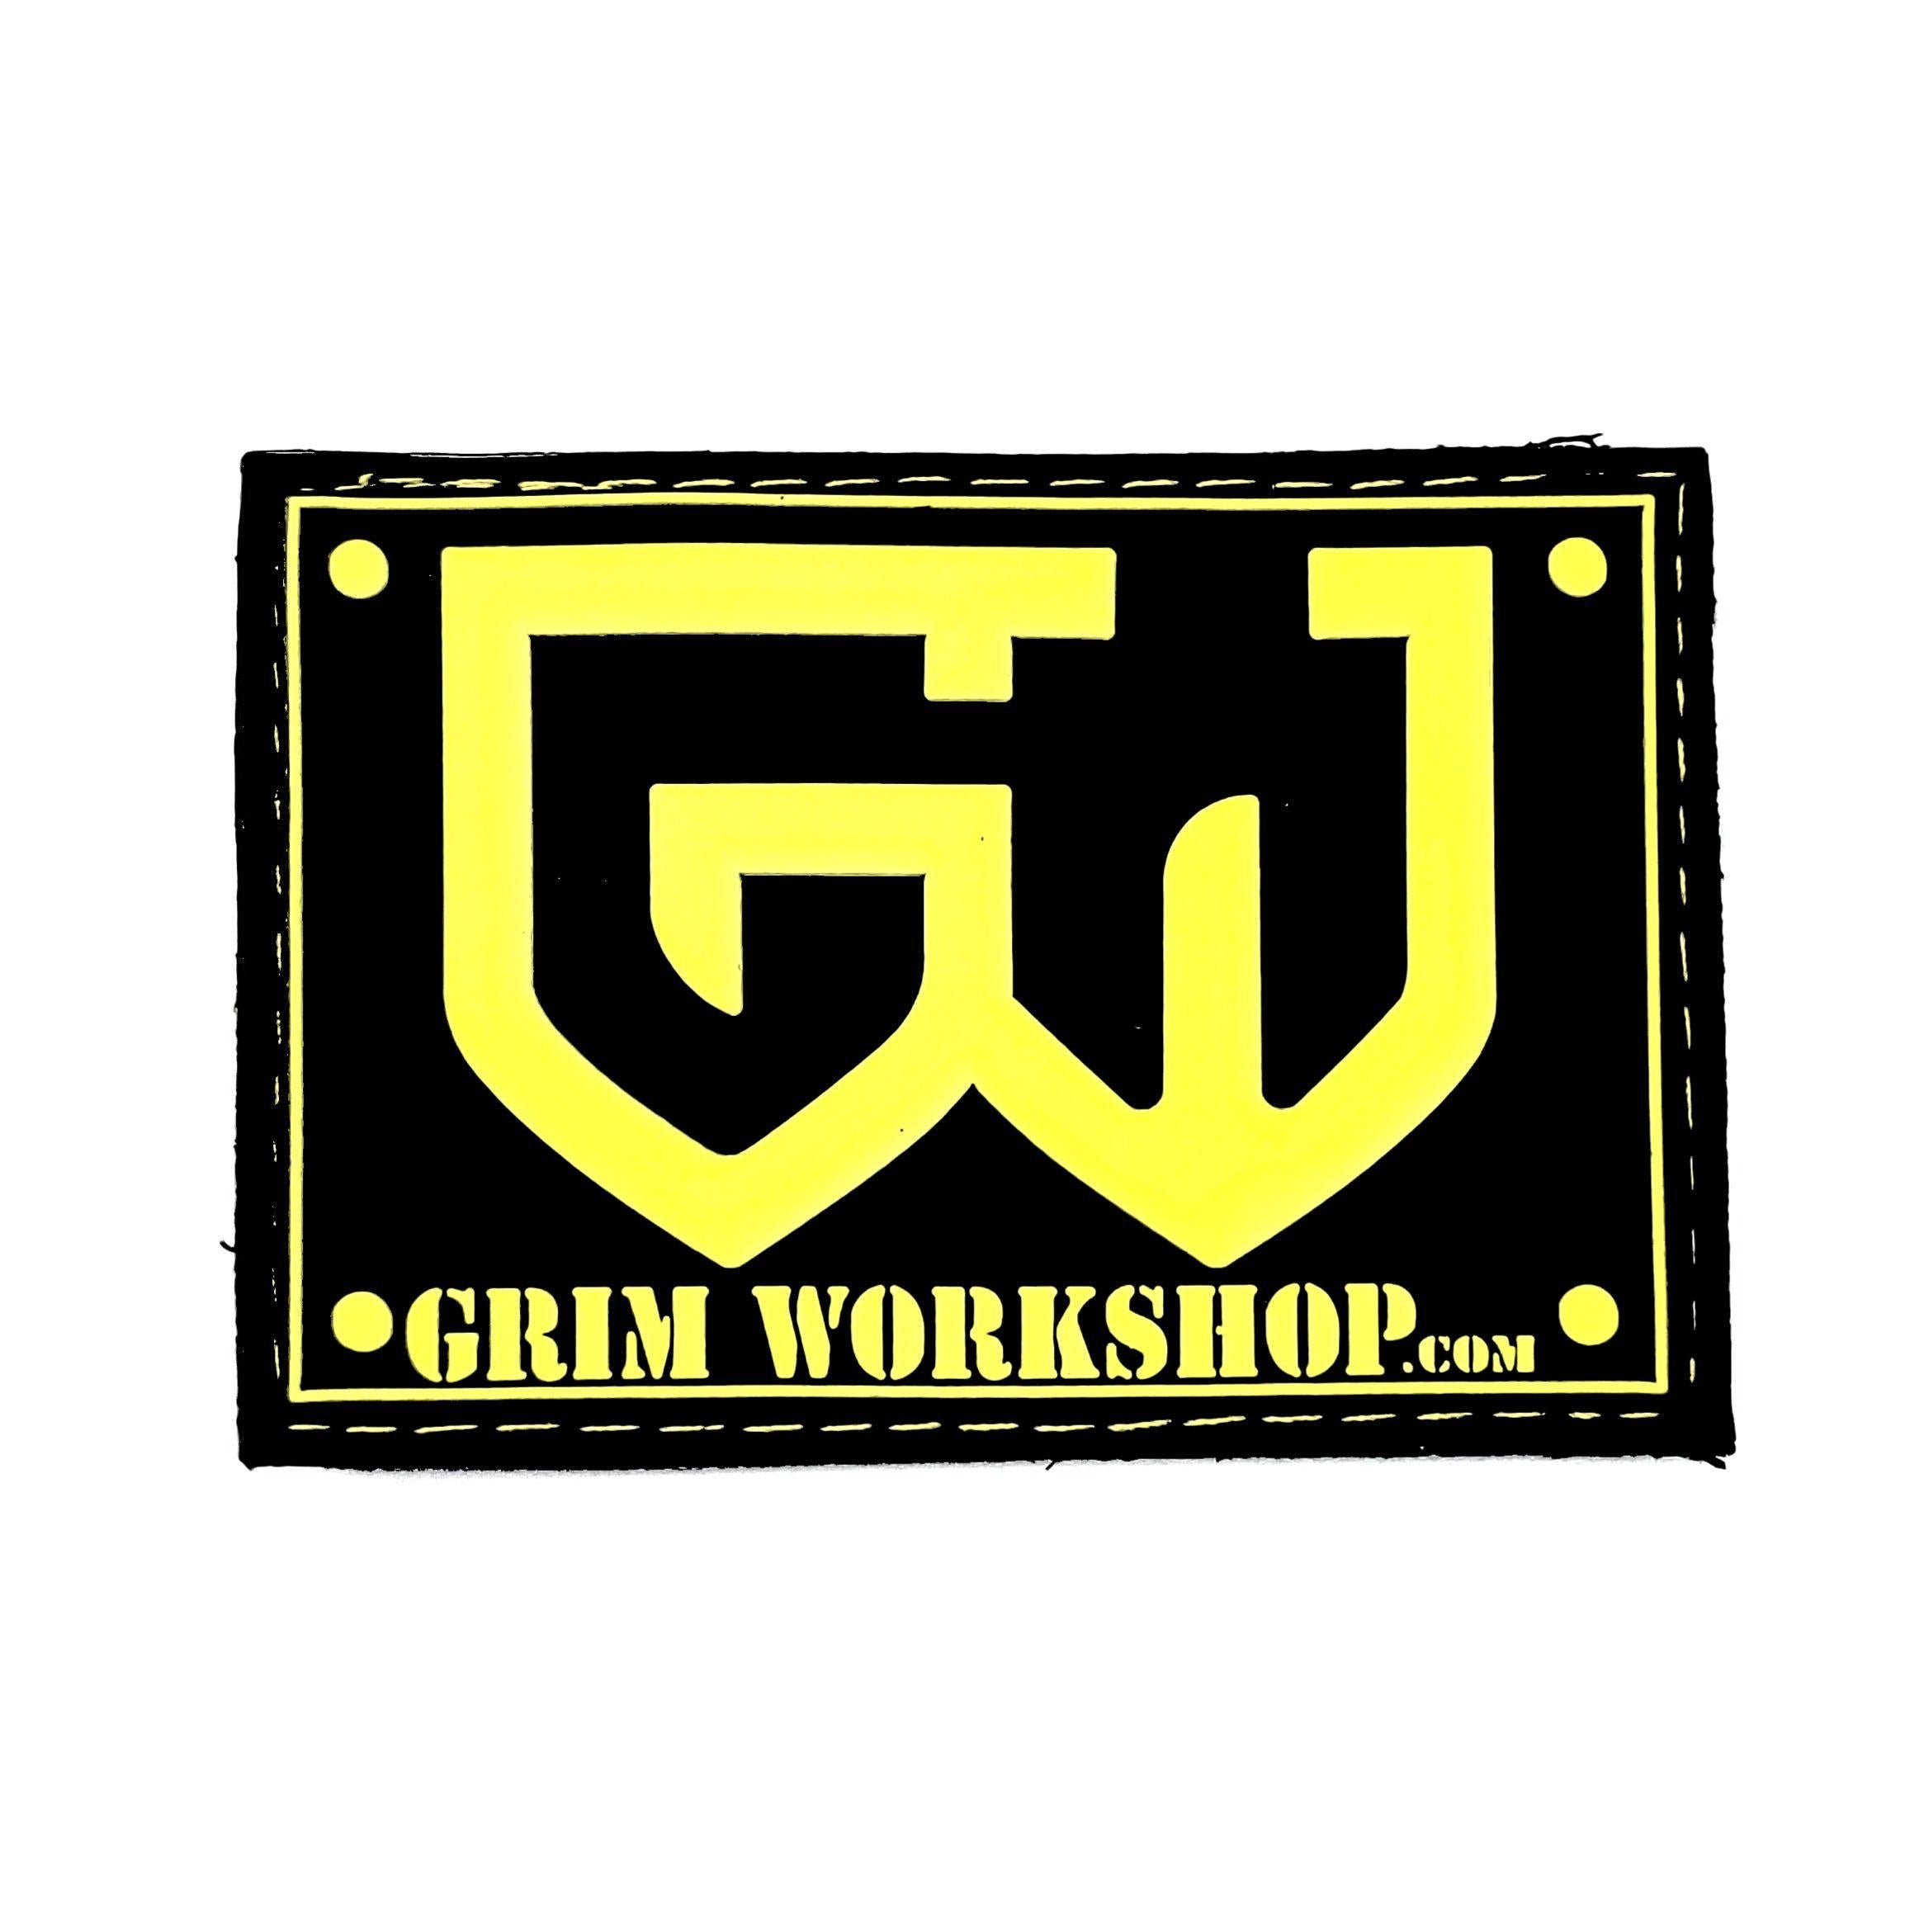 Grim yellow Morale Patch with Hidden Pocket-Grimworkshop-bugoutbag-bushcraft-edc-gear-edctool-everydaycarry-survivalcard-survivalkit-wilderness-prepping-toolkit